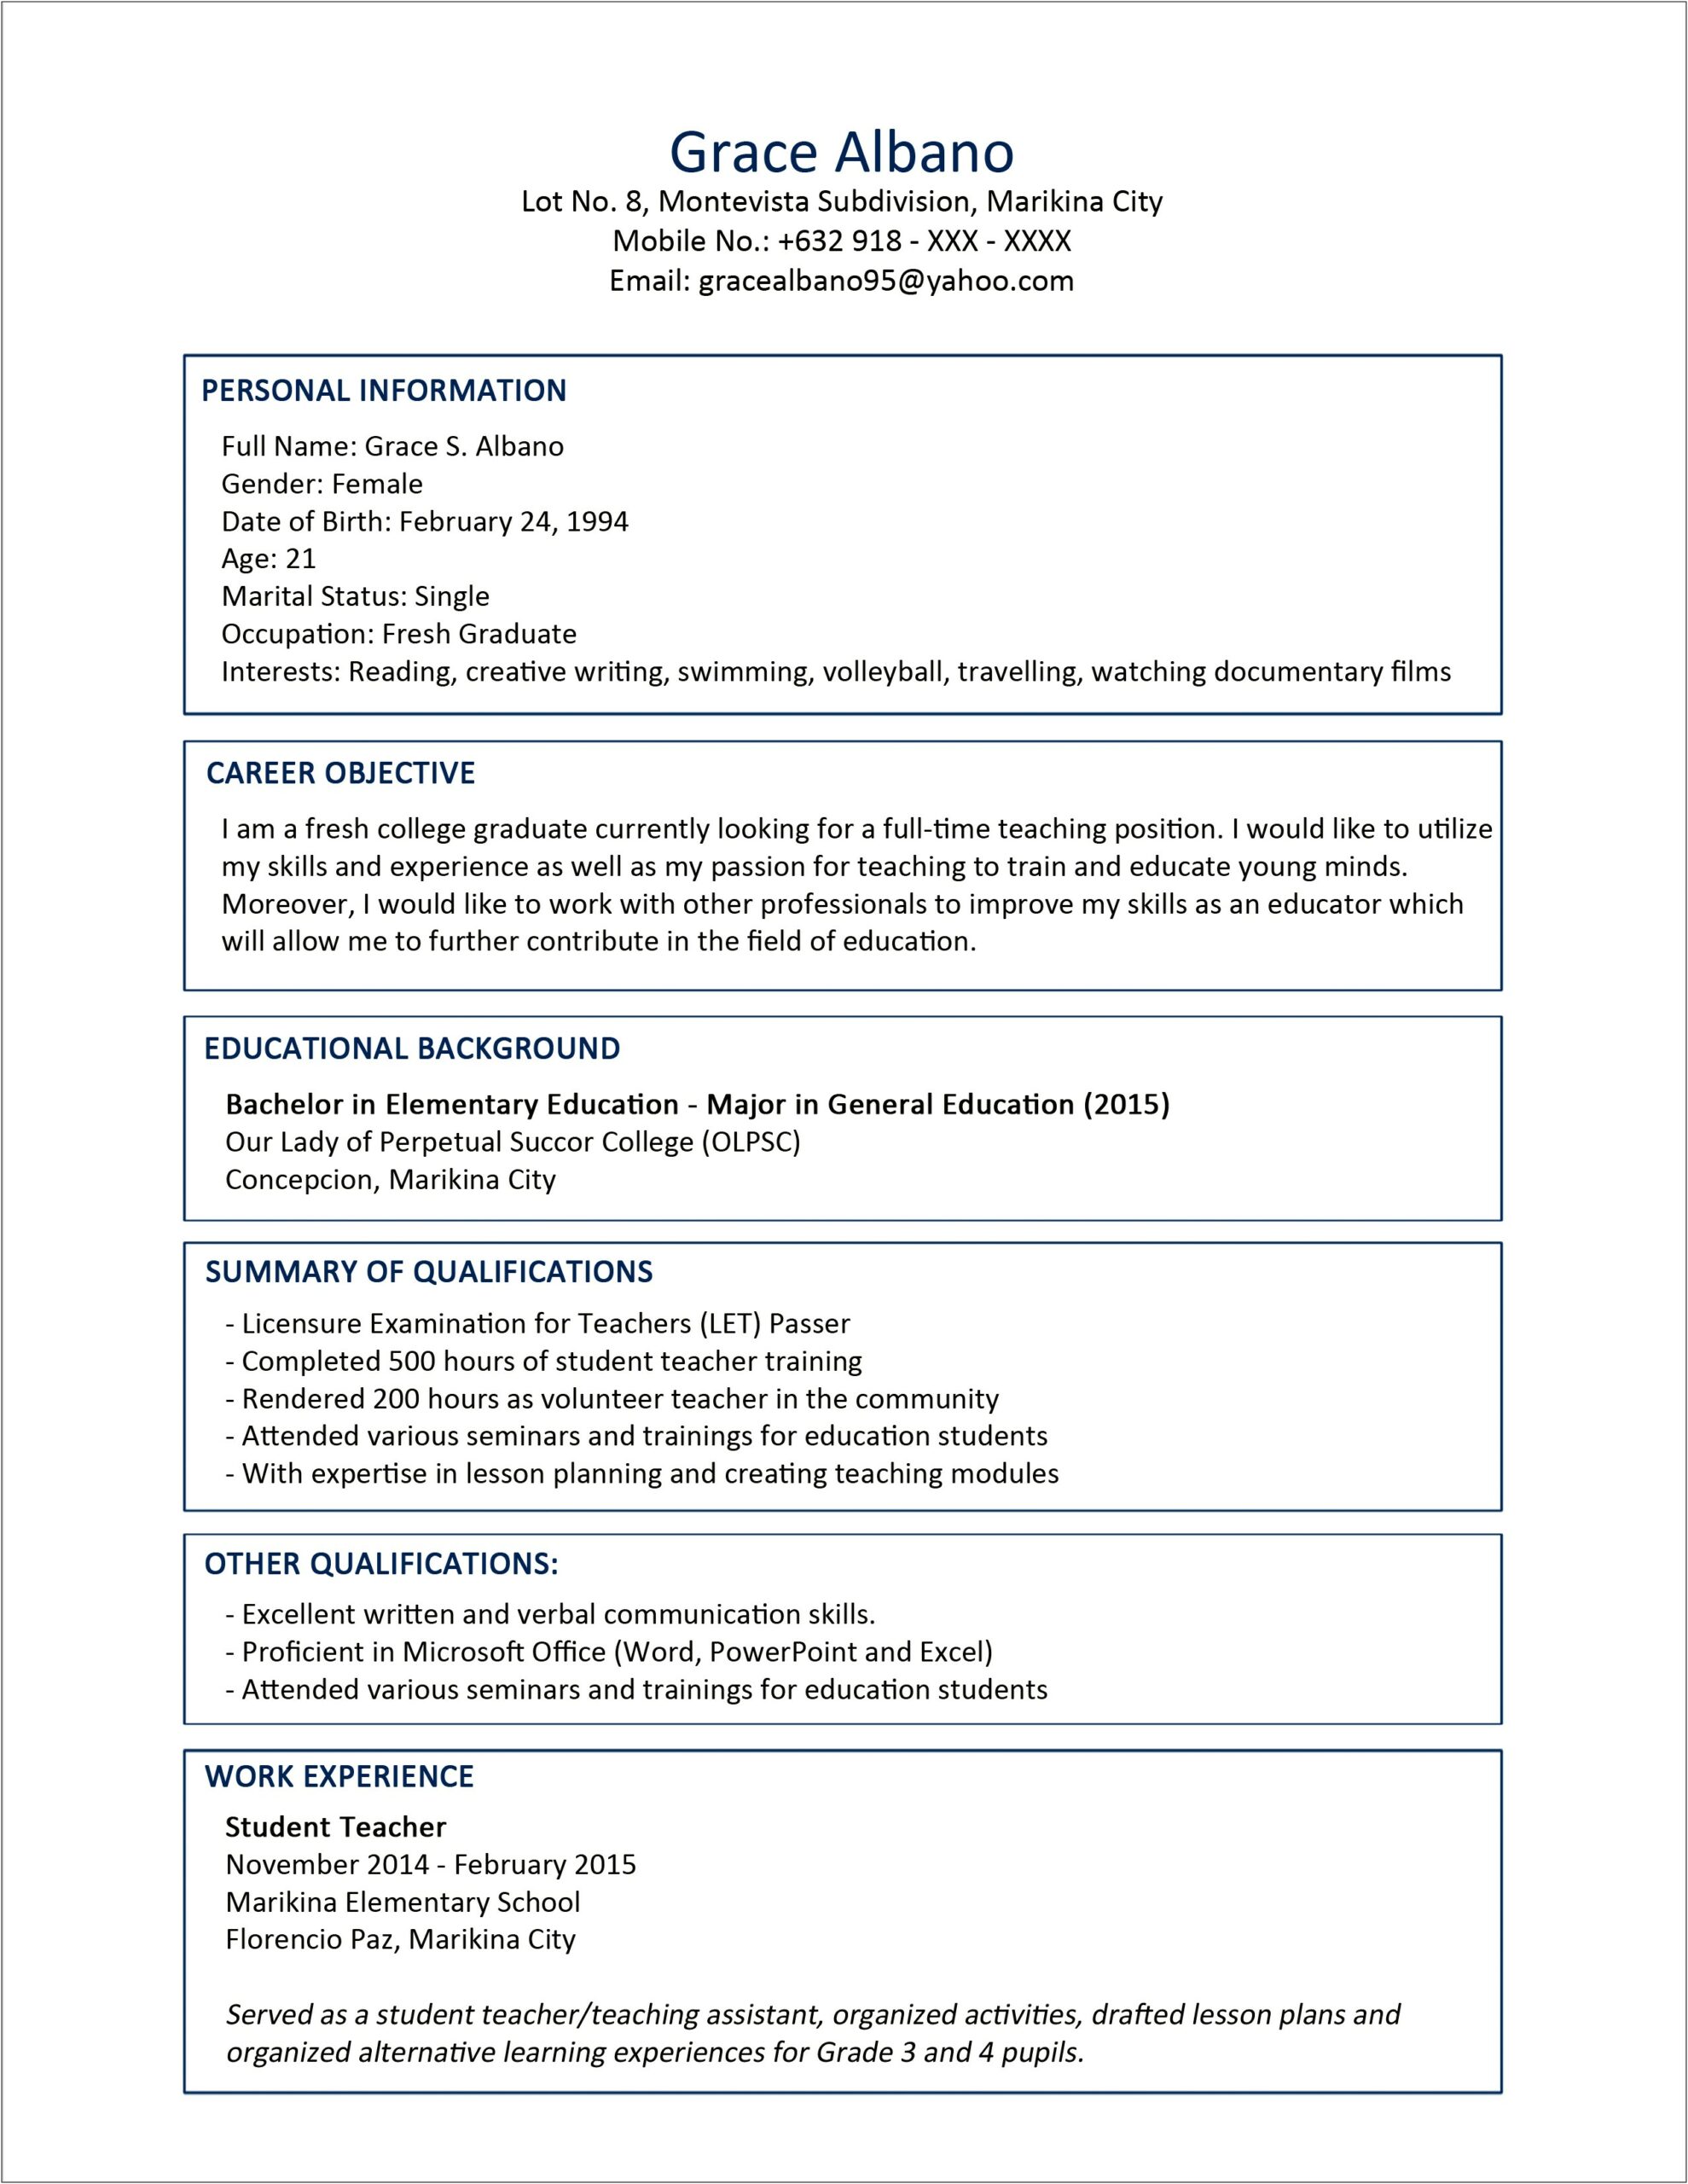 Resume If Attended School 1 Term